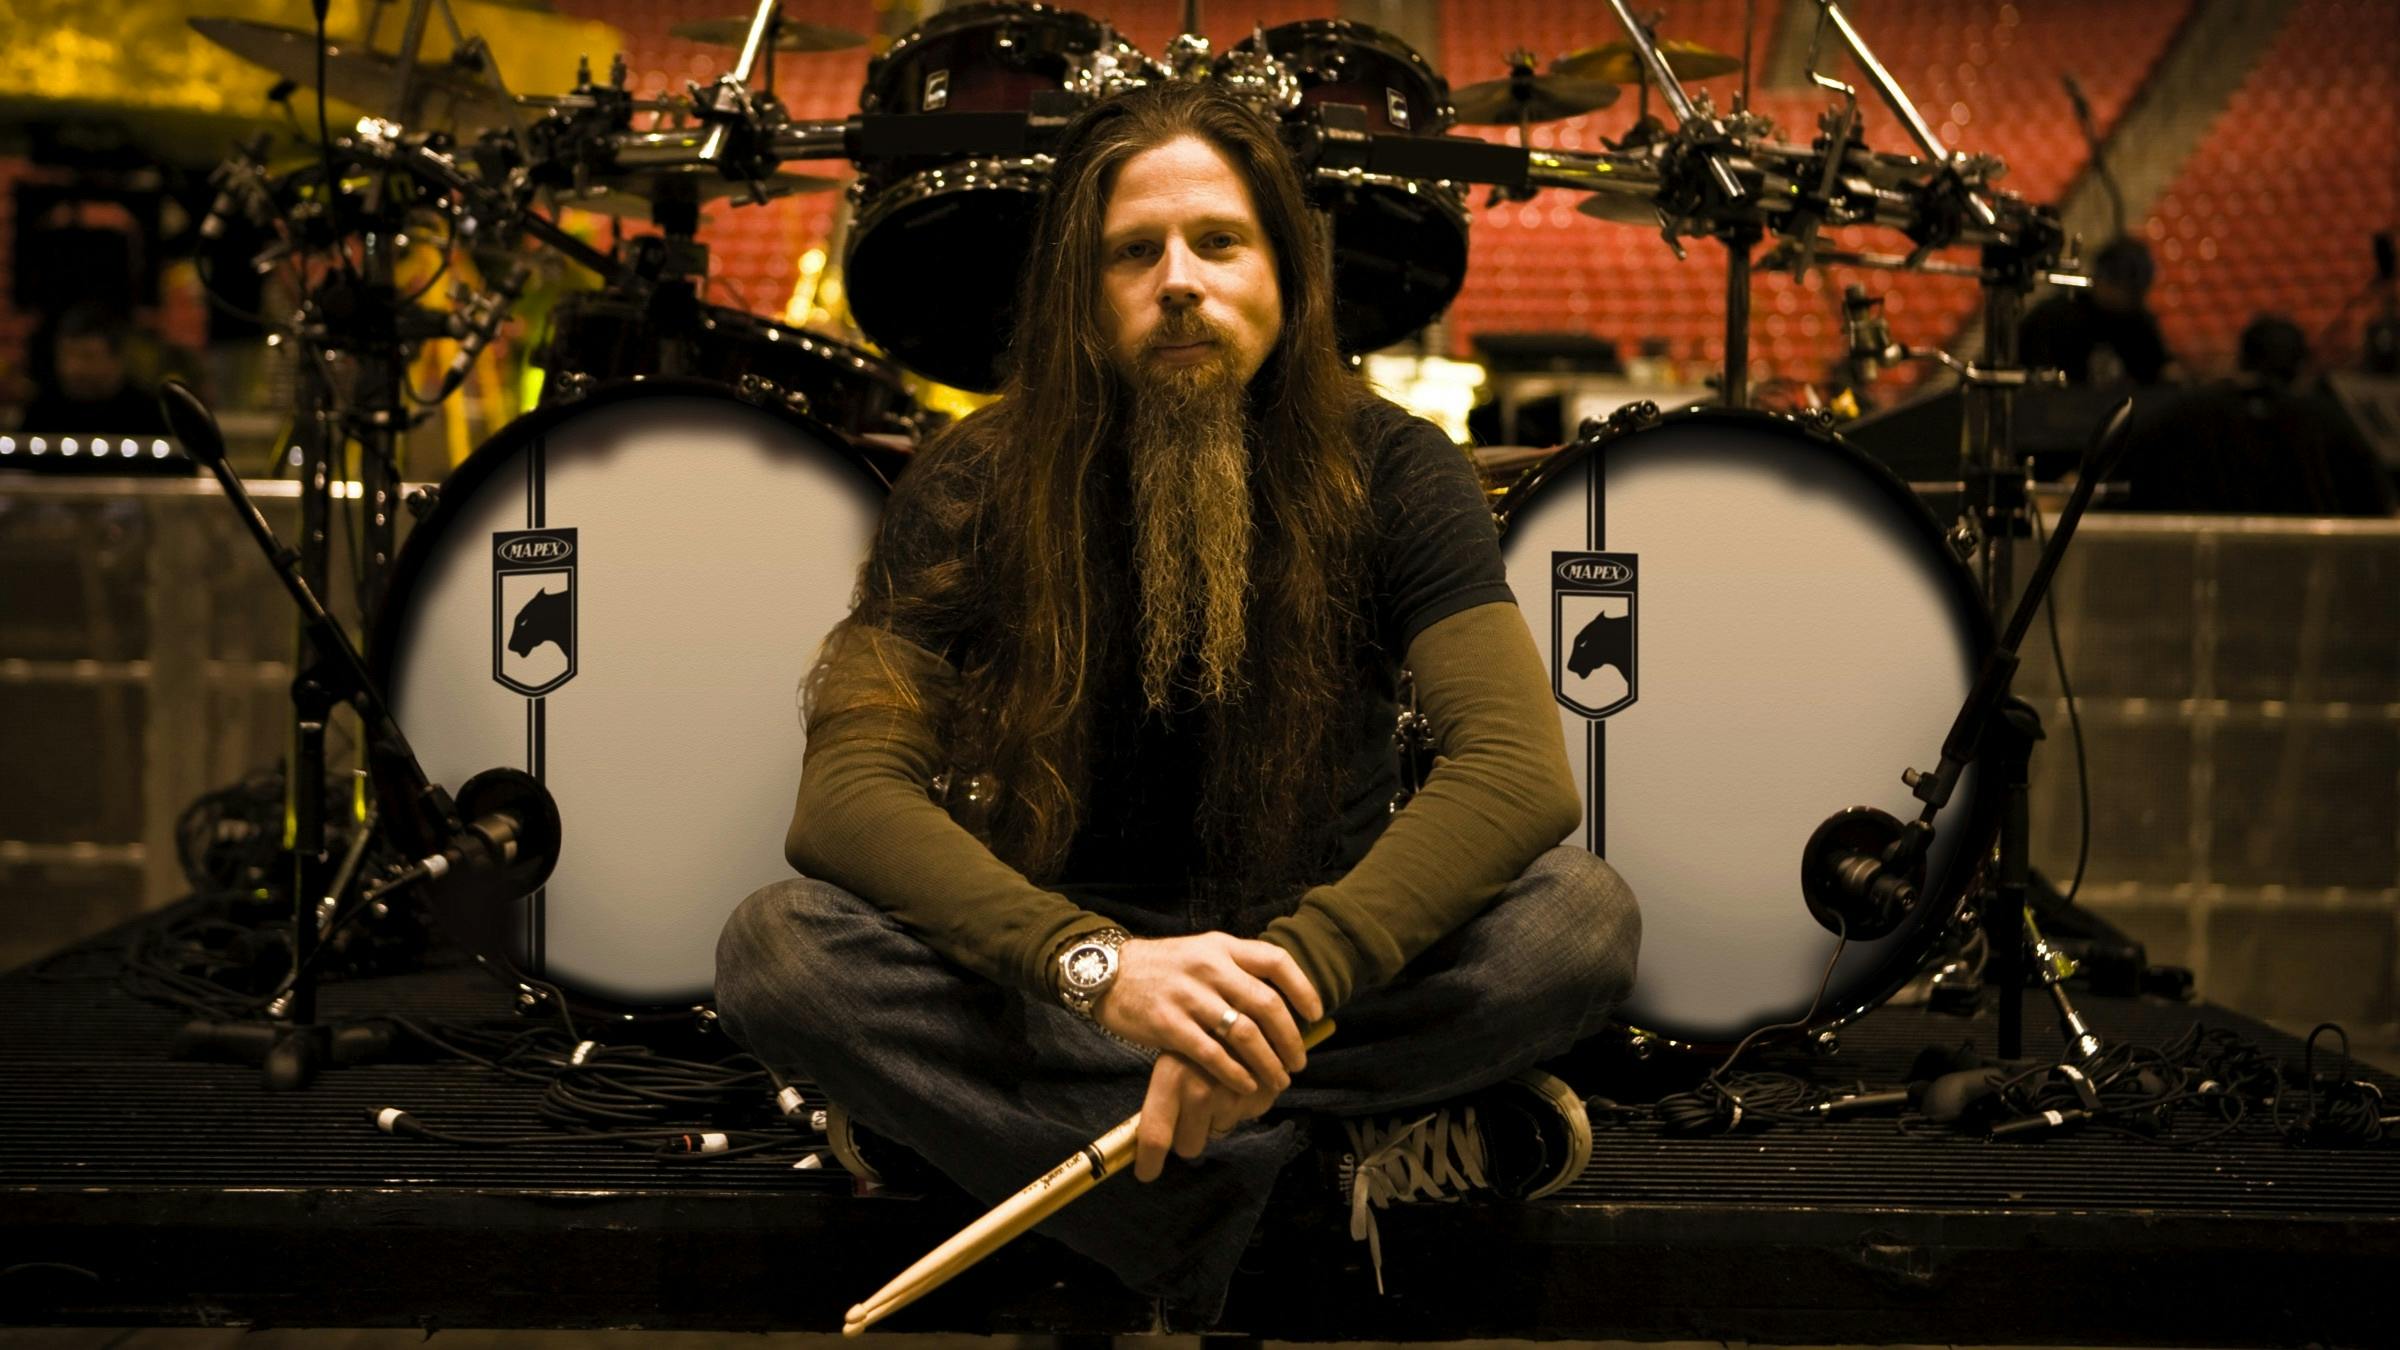 Chris Adler Addresses Lamb Of God Departure: "I Was Not Given A Choice In This"